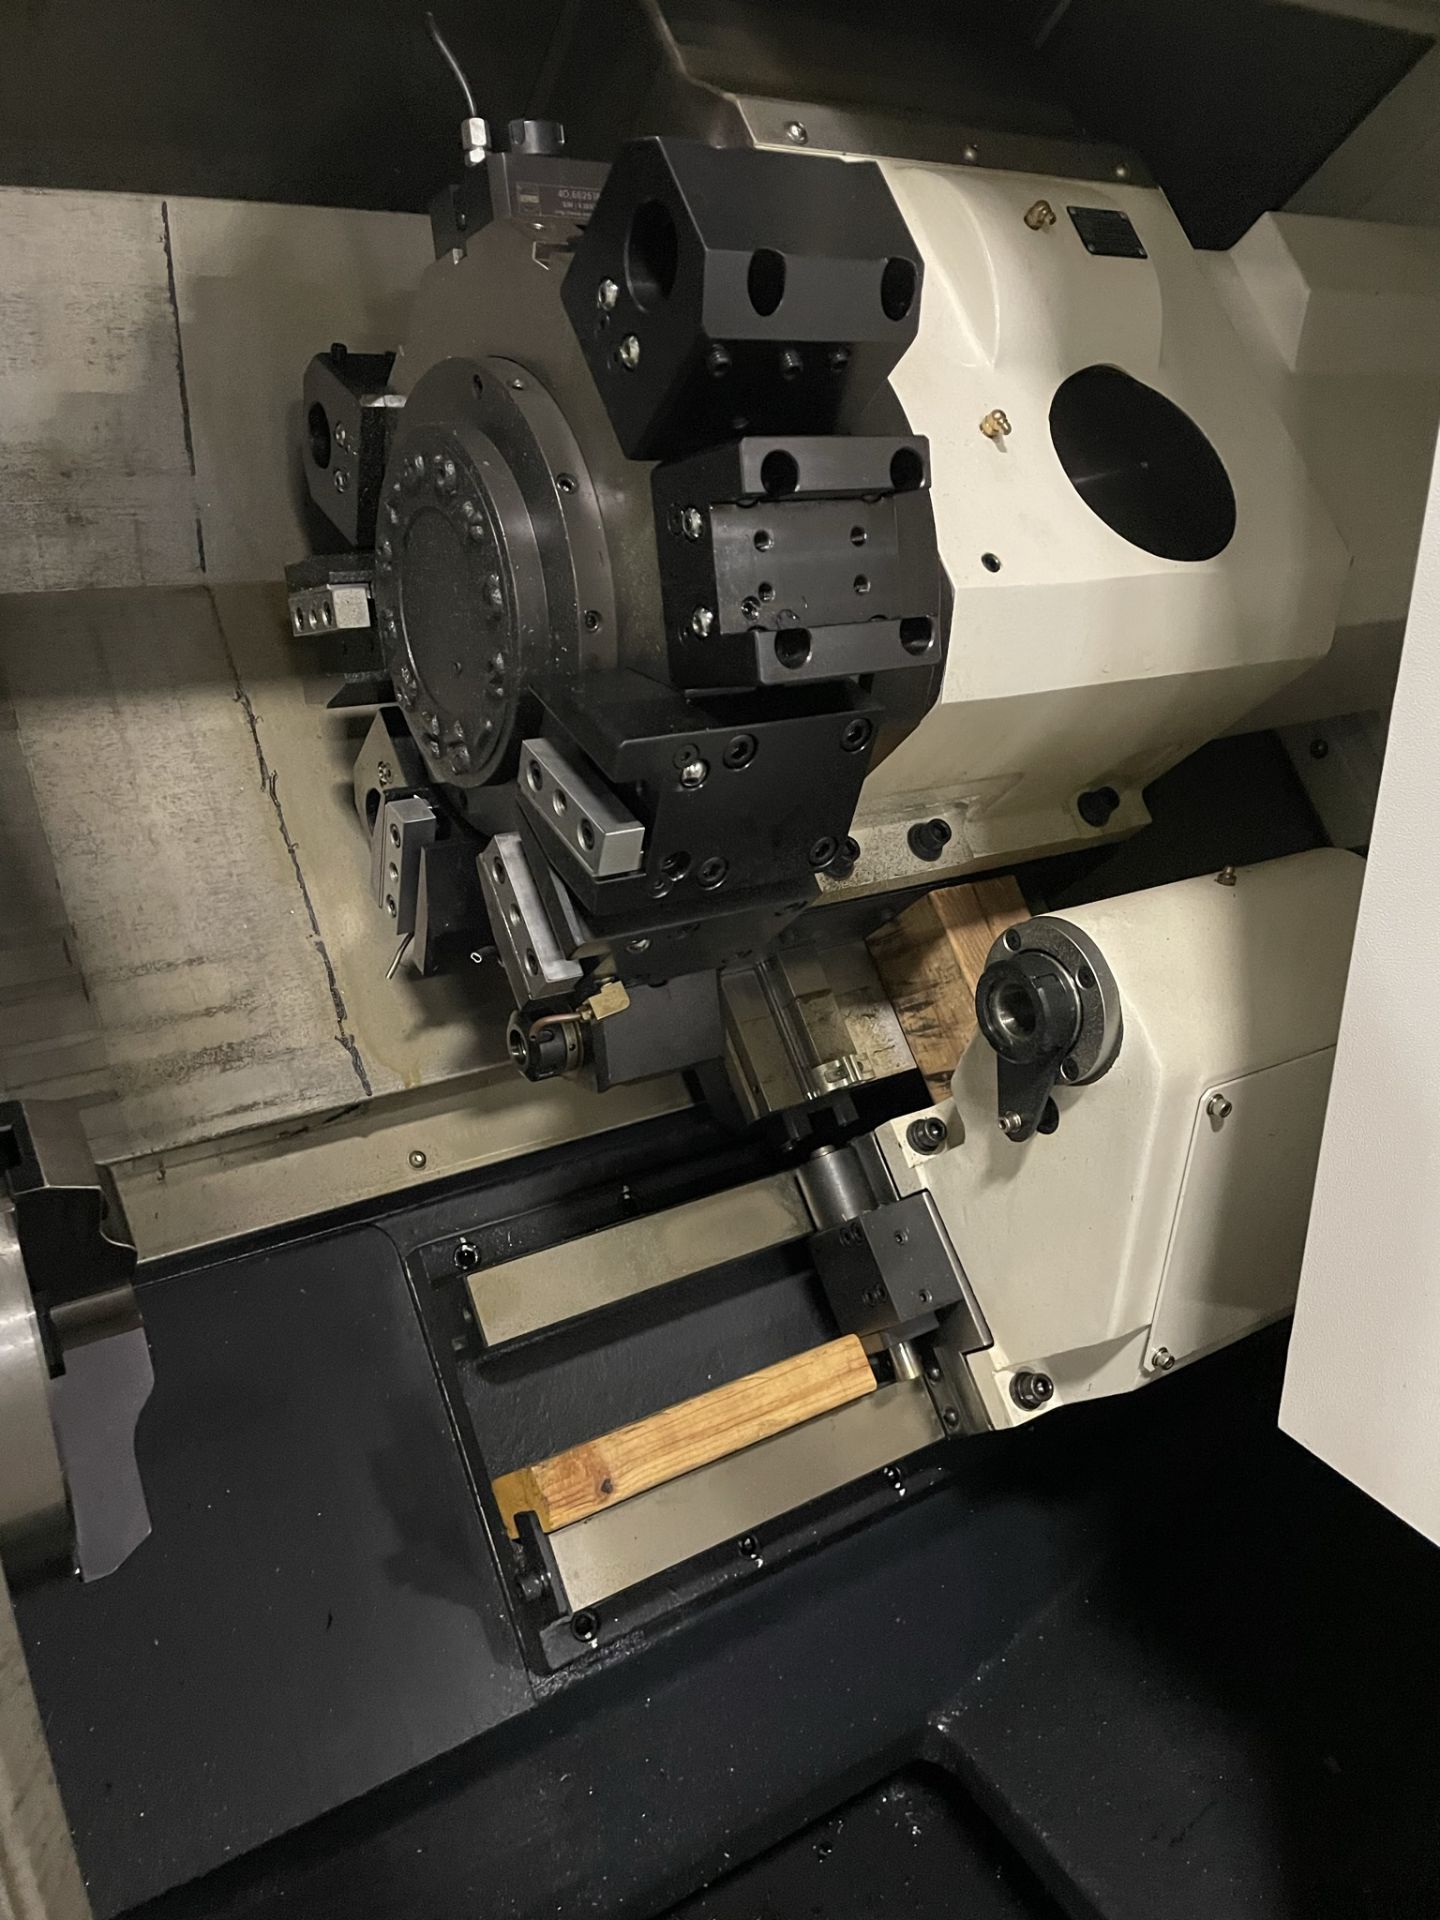 2018 Hwacheon Model Cutex 160B CNC Lathe, Fanuc I Ser. Cont., Live Tooling Swing Over Bed: 21.65” - Image 4 of 9